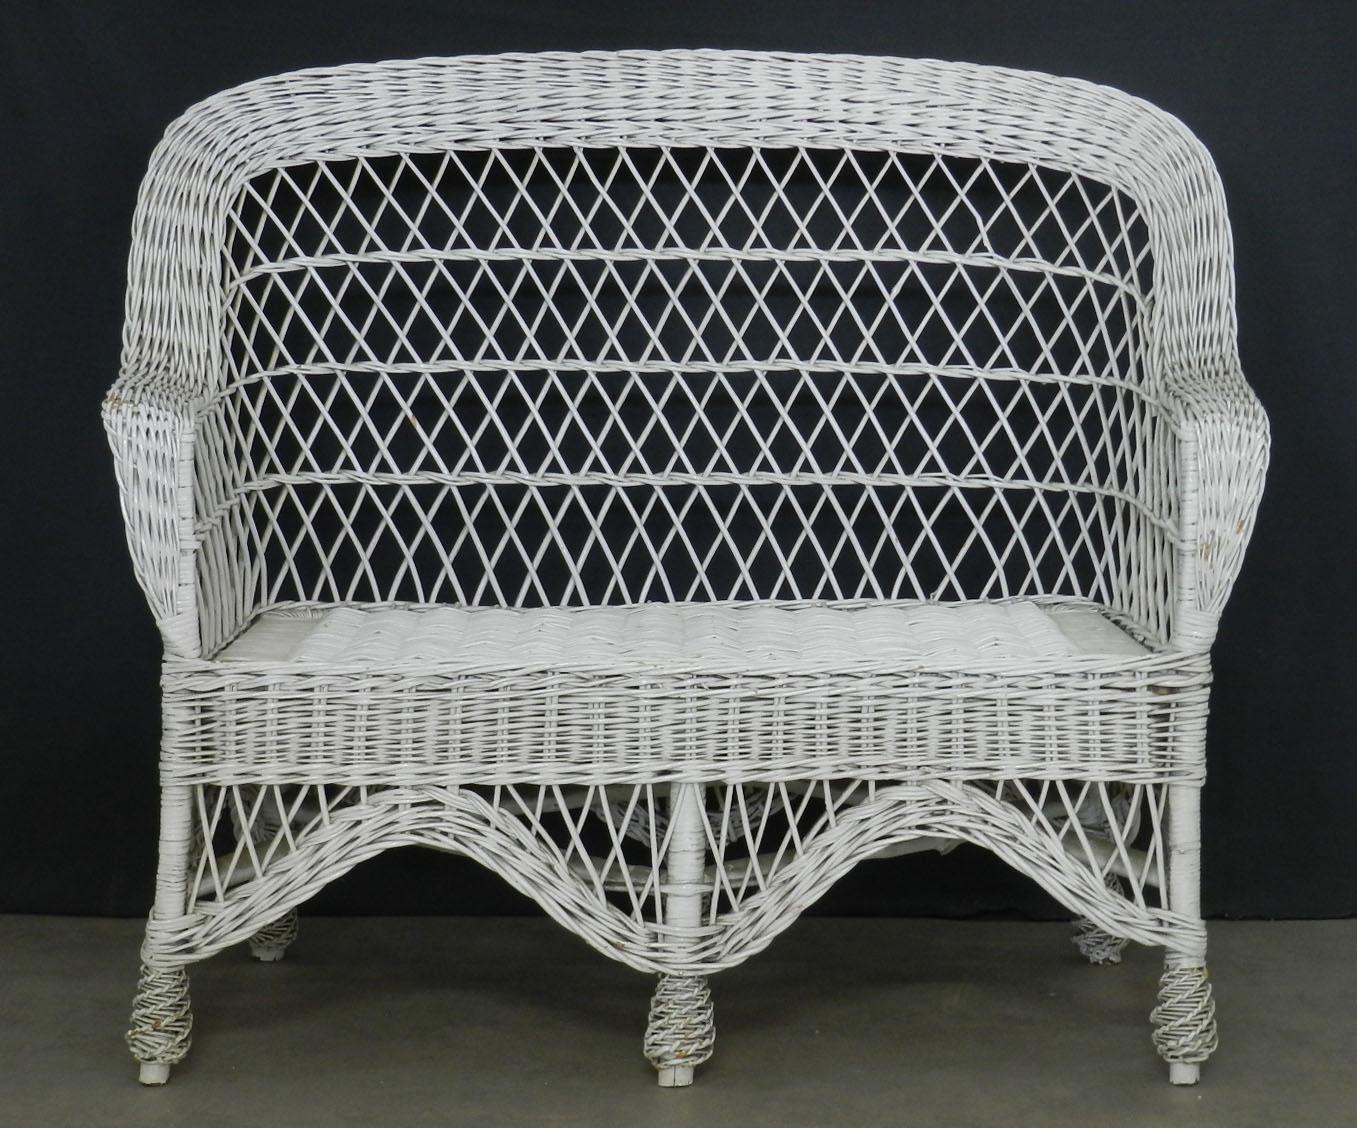 French white wicker sofa, circa 1970
Caned patio or conservatory settee
Rattan canapé
Handsome and comfortable
in good original vintage condition.
               